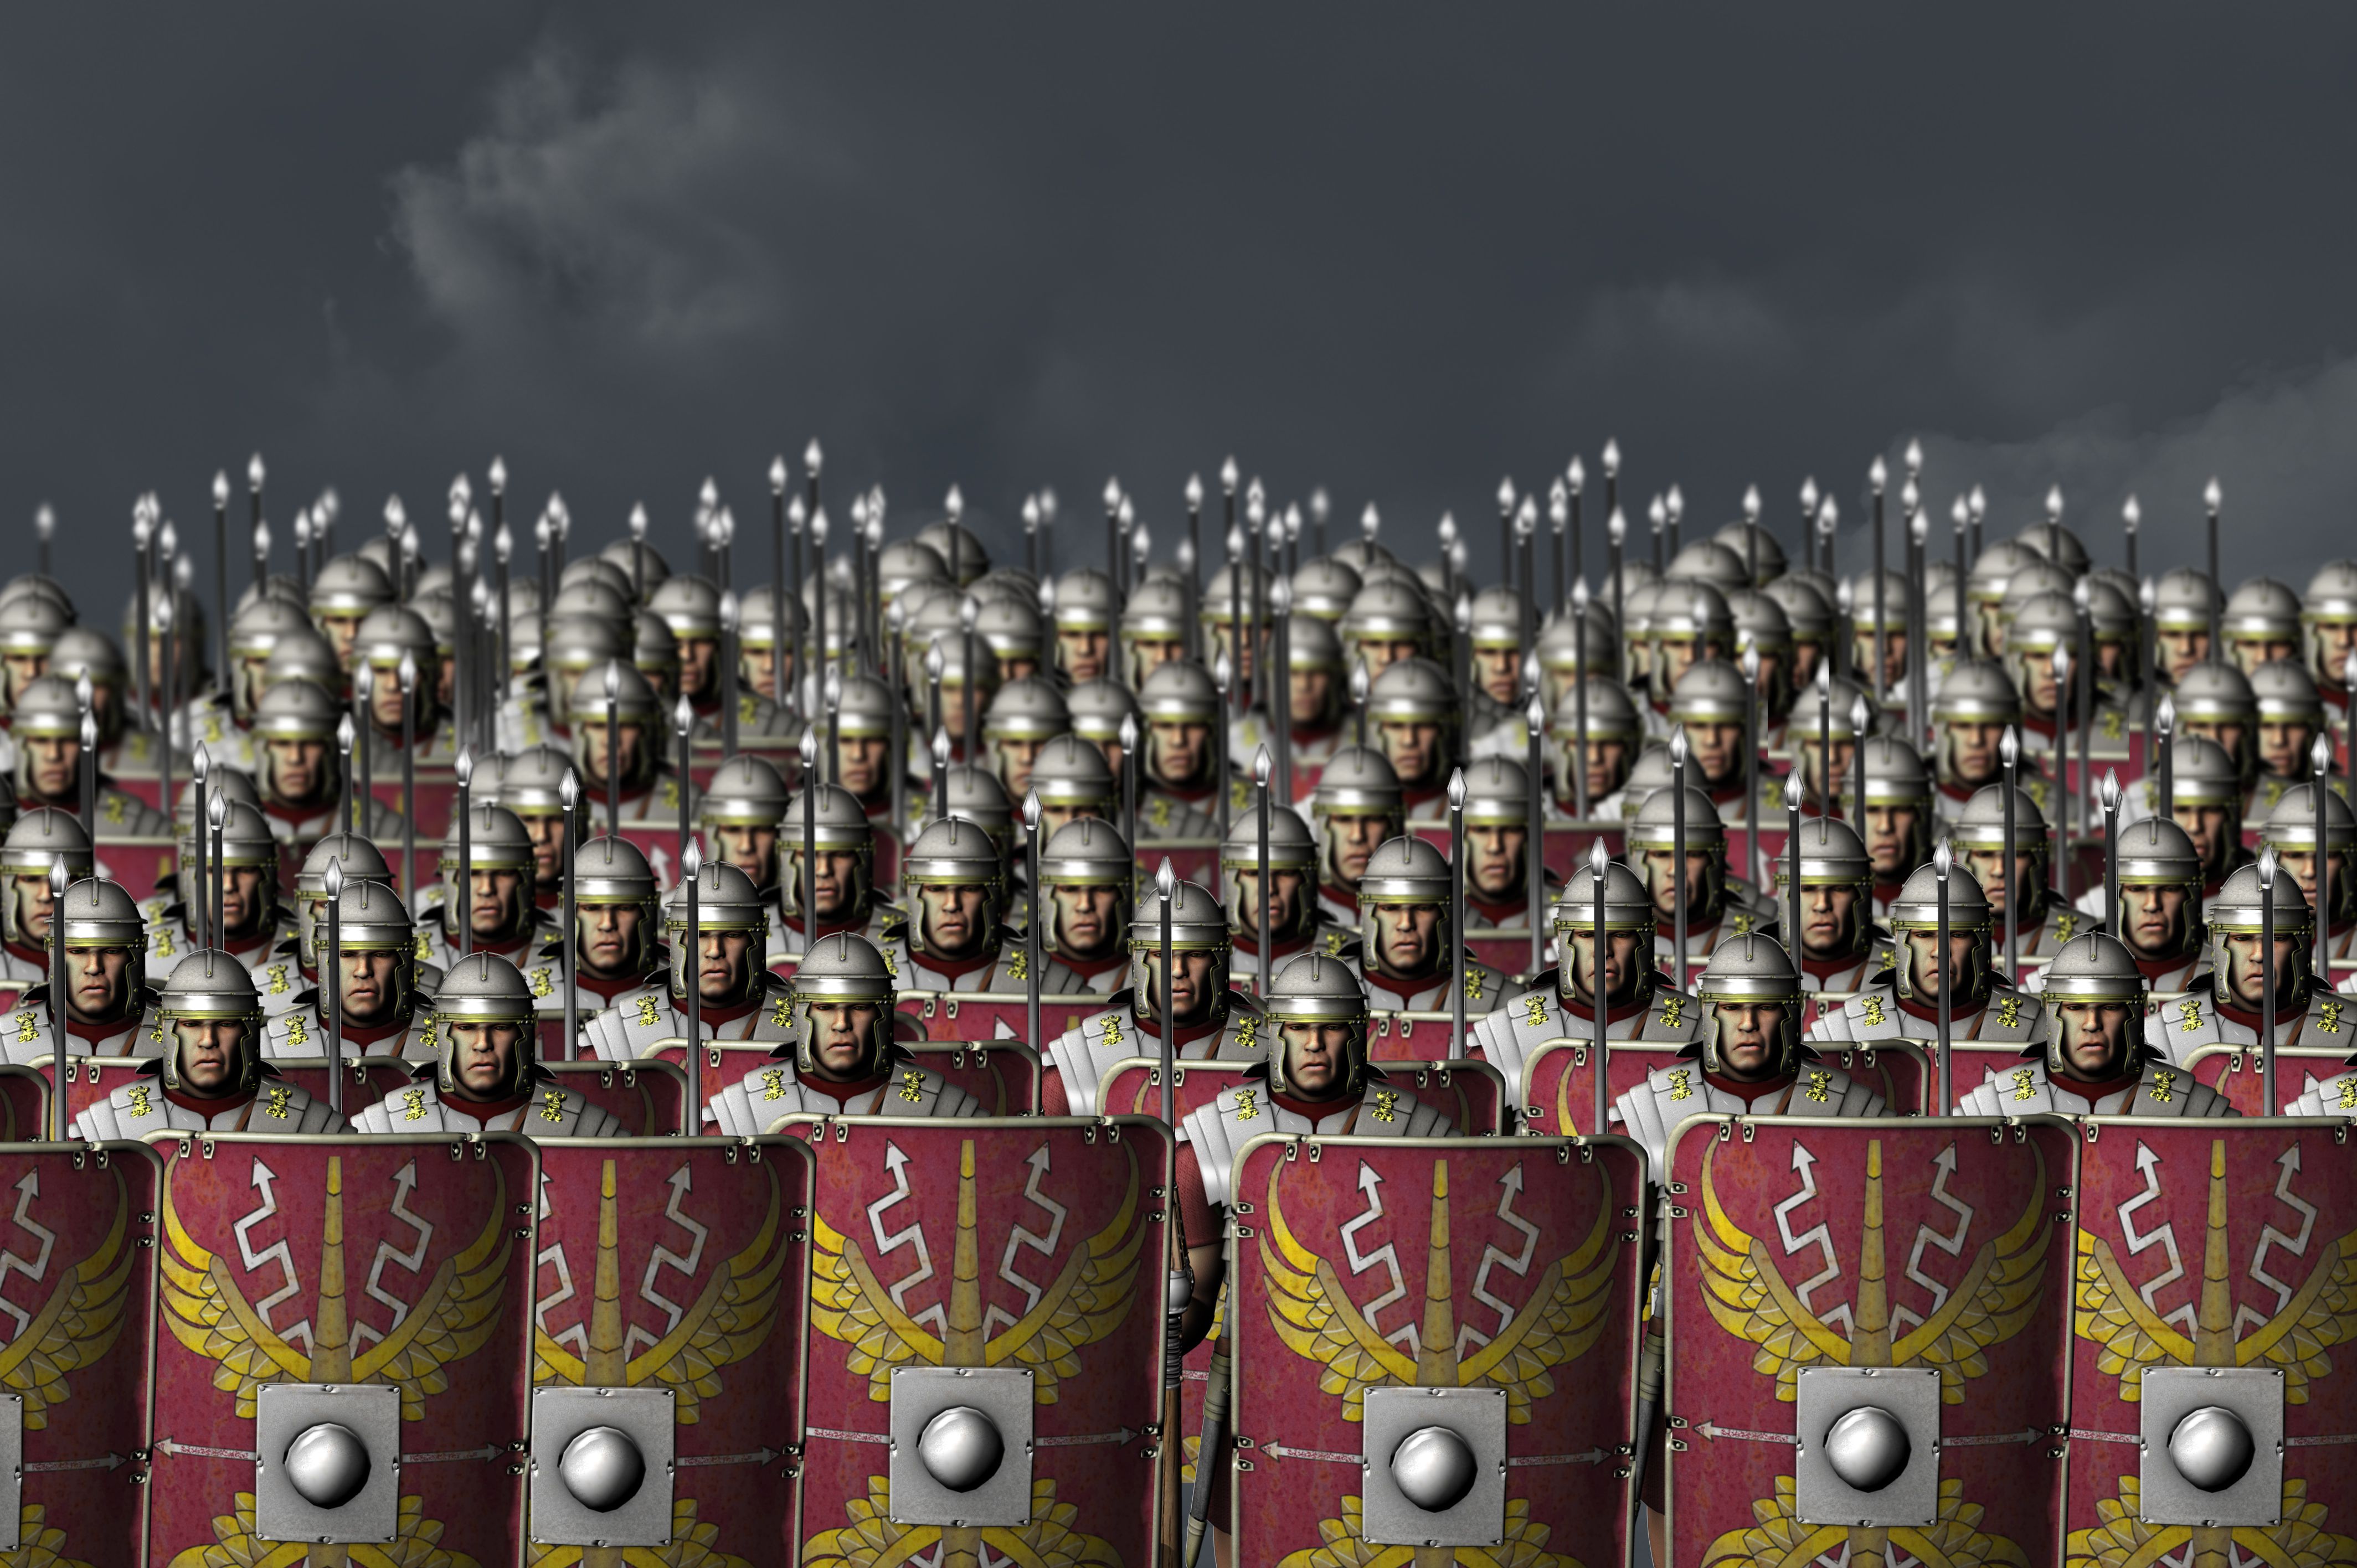 the roman army - facts about the roman army